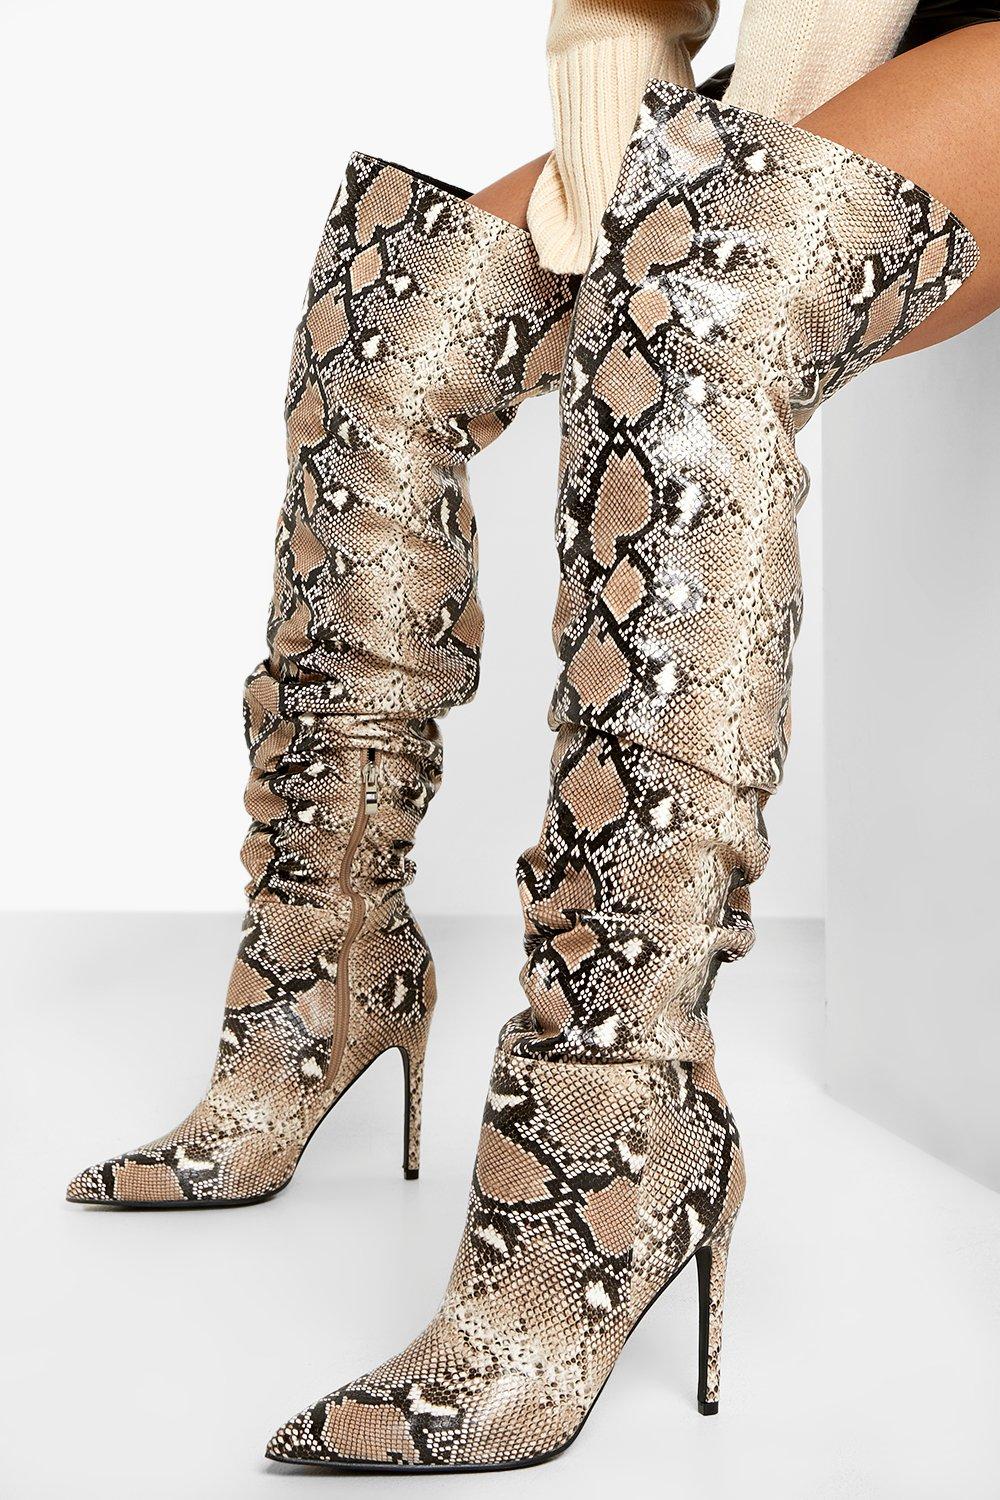 Tante ulv Optage Snake Print Thigh High Stiletto Boots | Boohoo UK